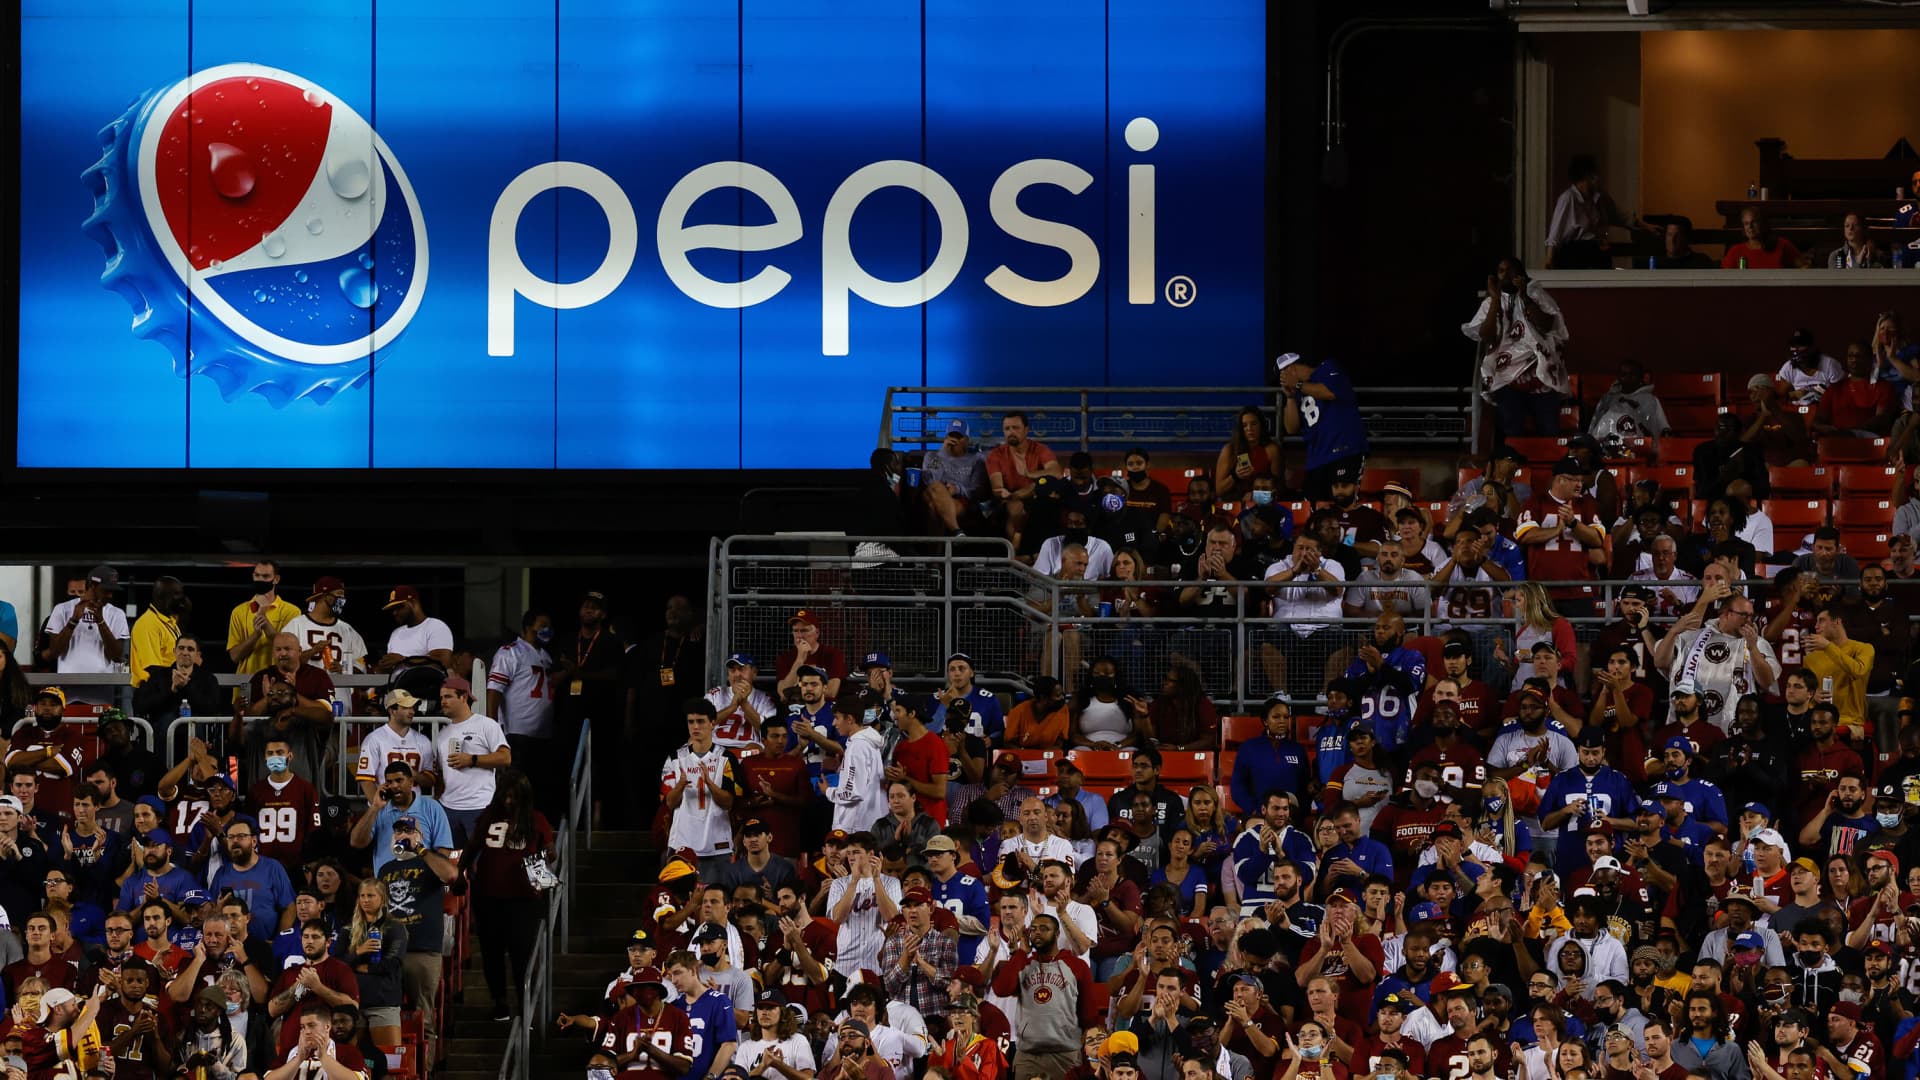 NFL renews its sponsorship deal with Pepsi, but without the Super Bowl halftime ..